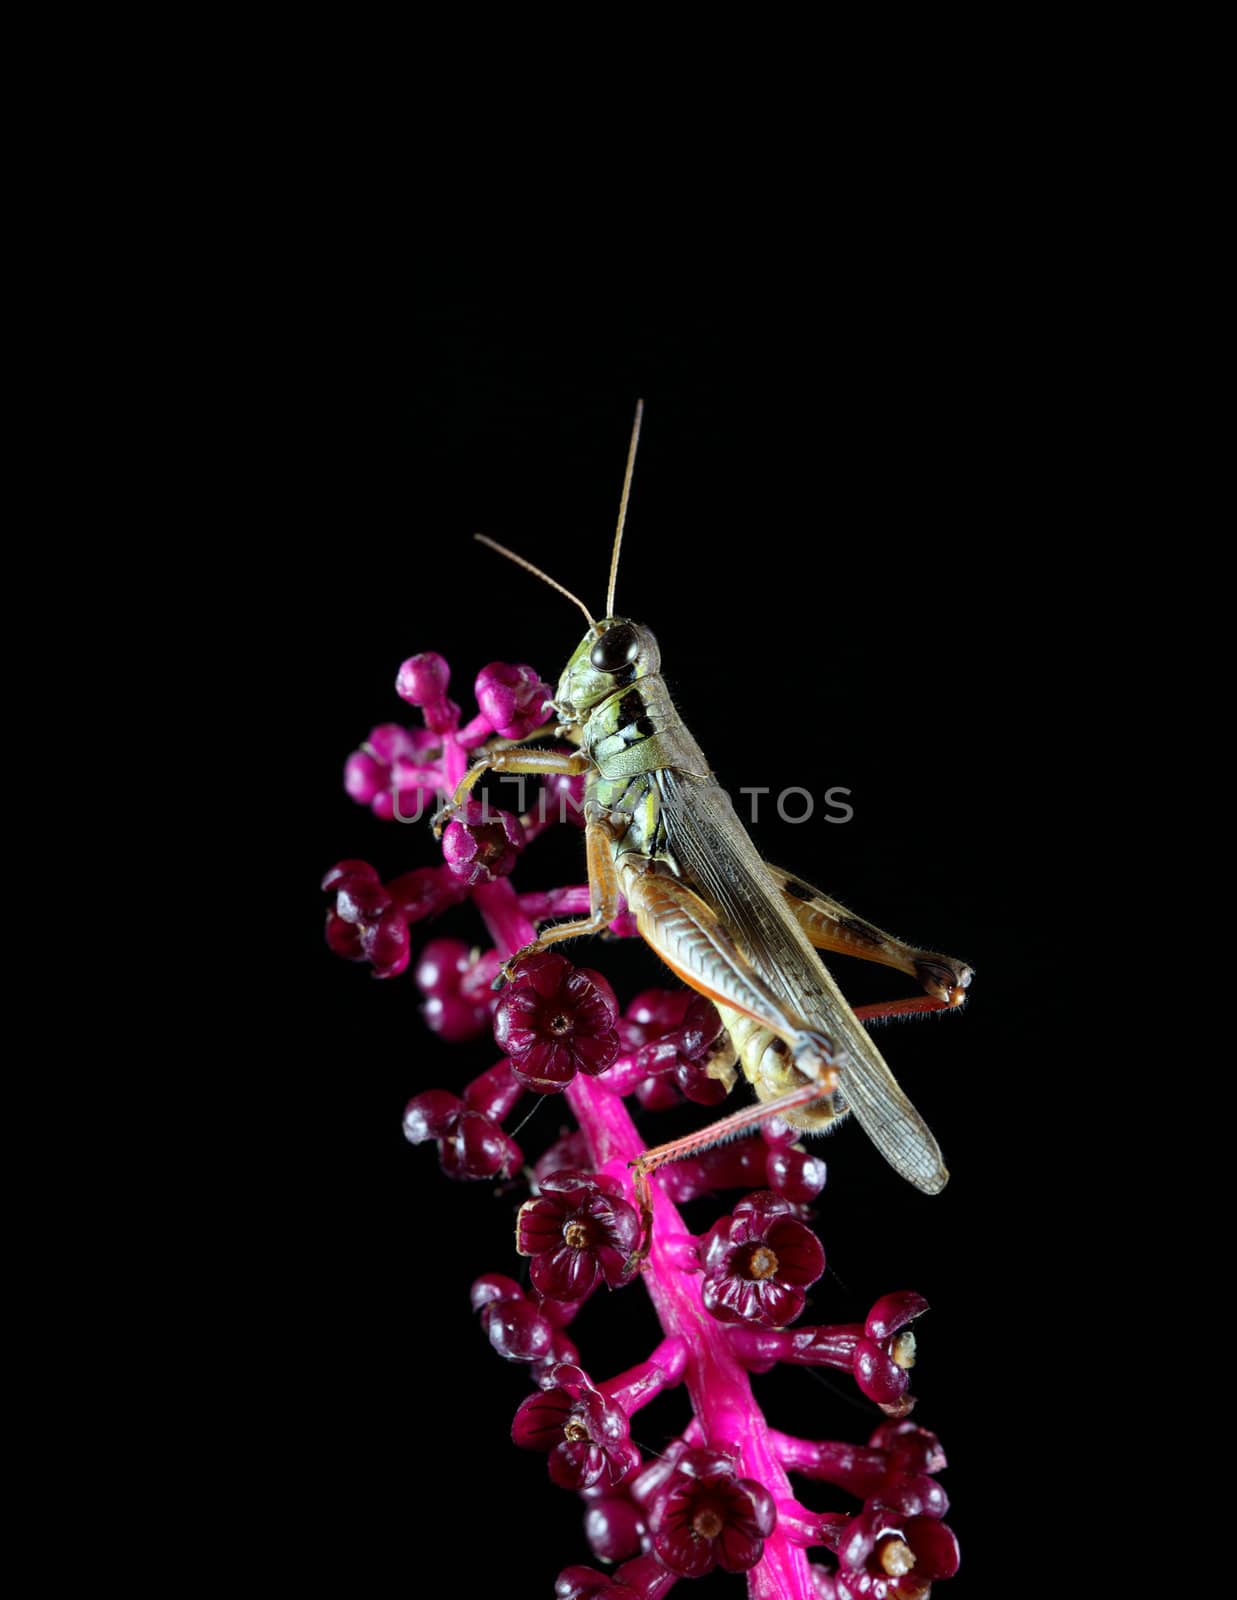 A macro shot of a grasshopper on a flowering pink plant against a solid black background.